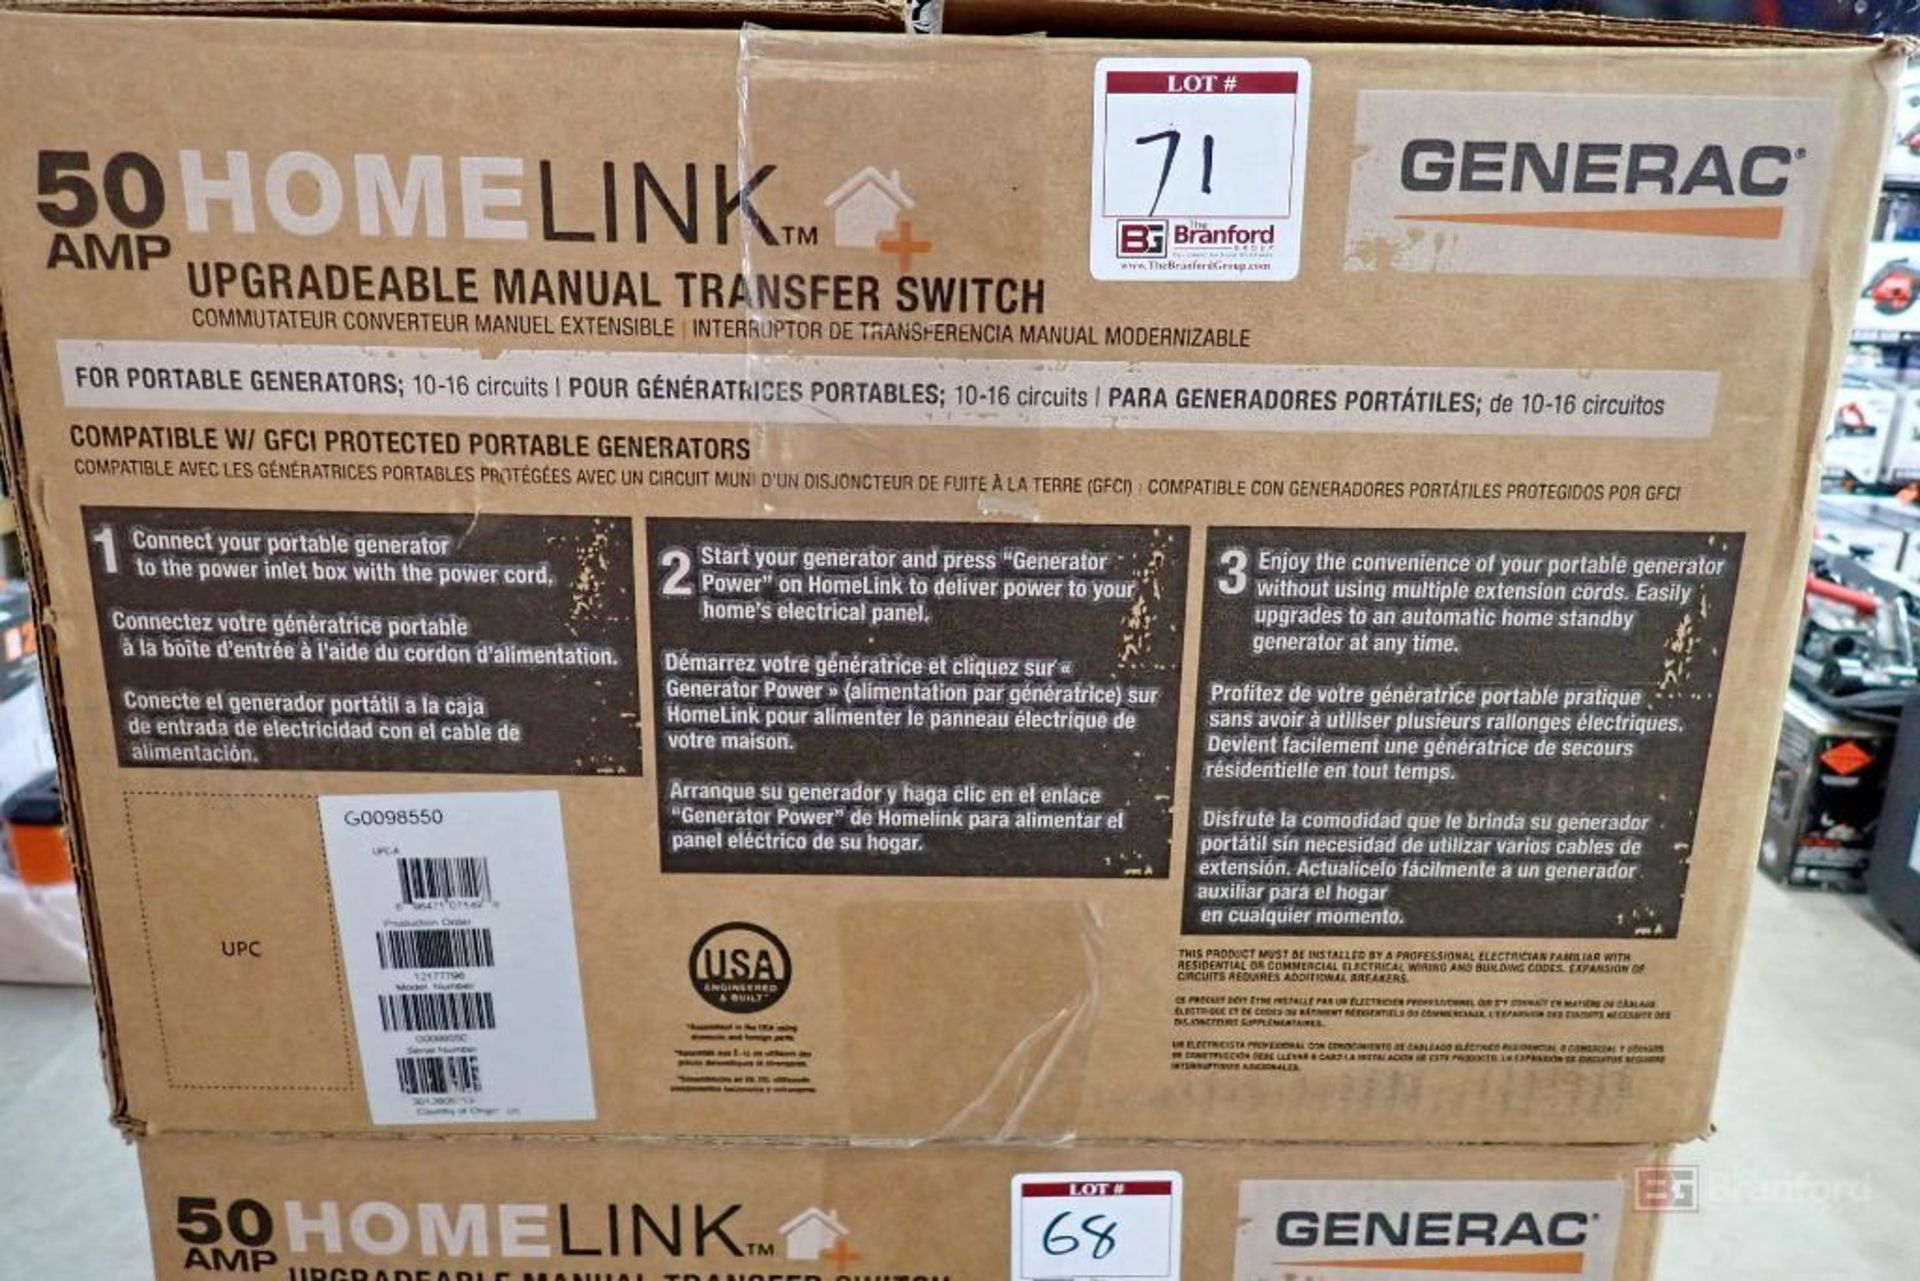 GENERAC GNR98550 HomeLink 50 AMP Upgradeable Manual Transfer Switch - Image 2 of 6